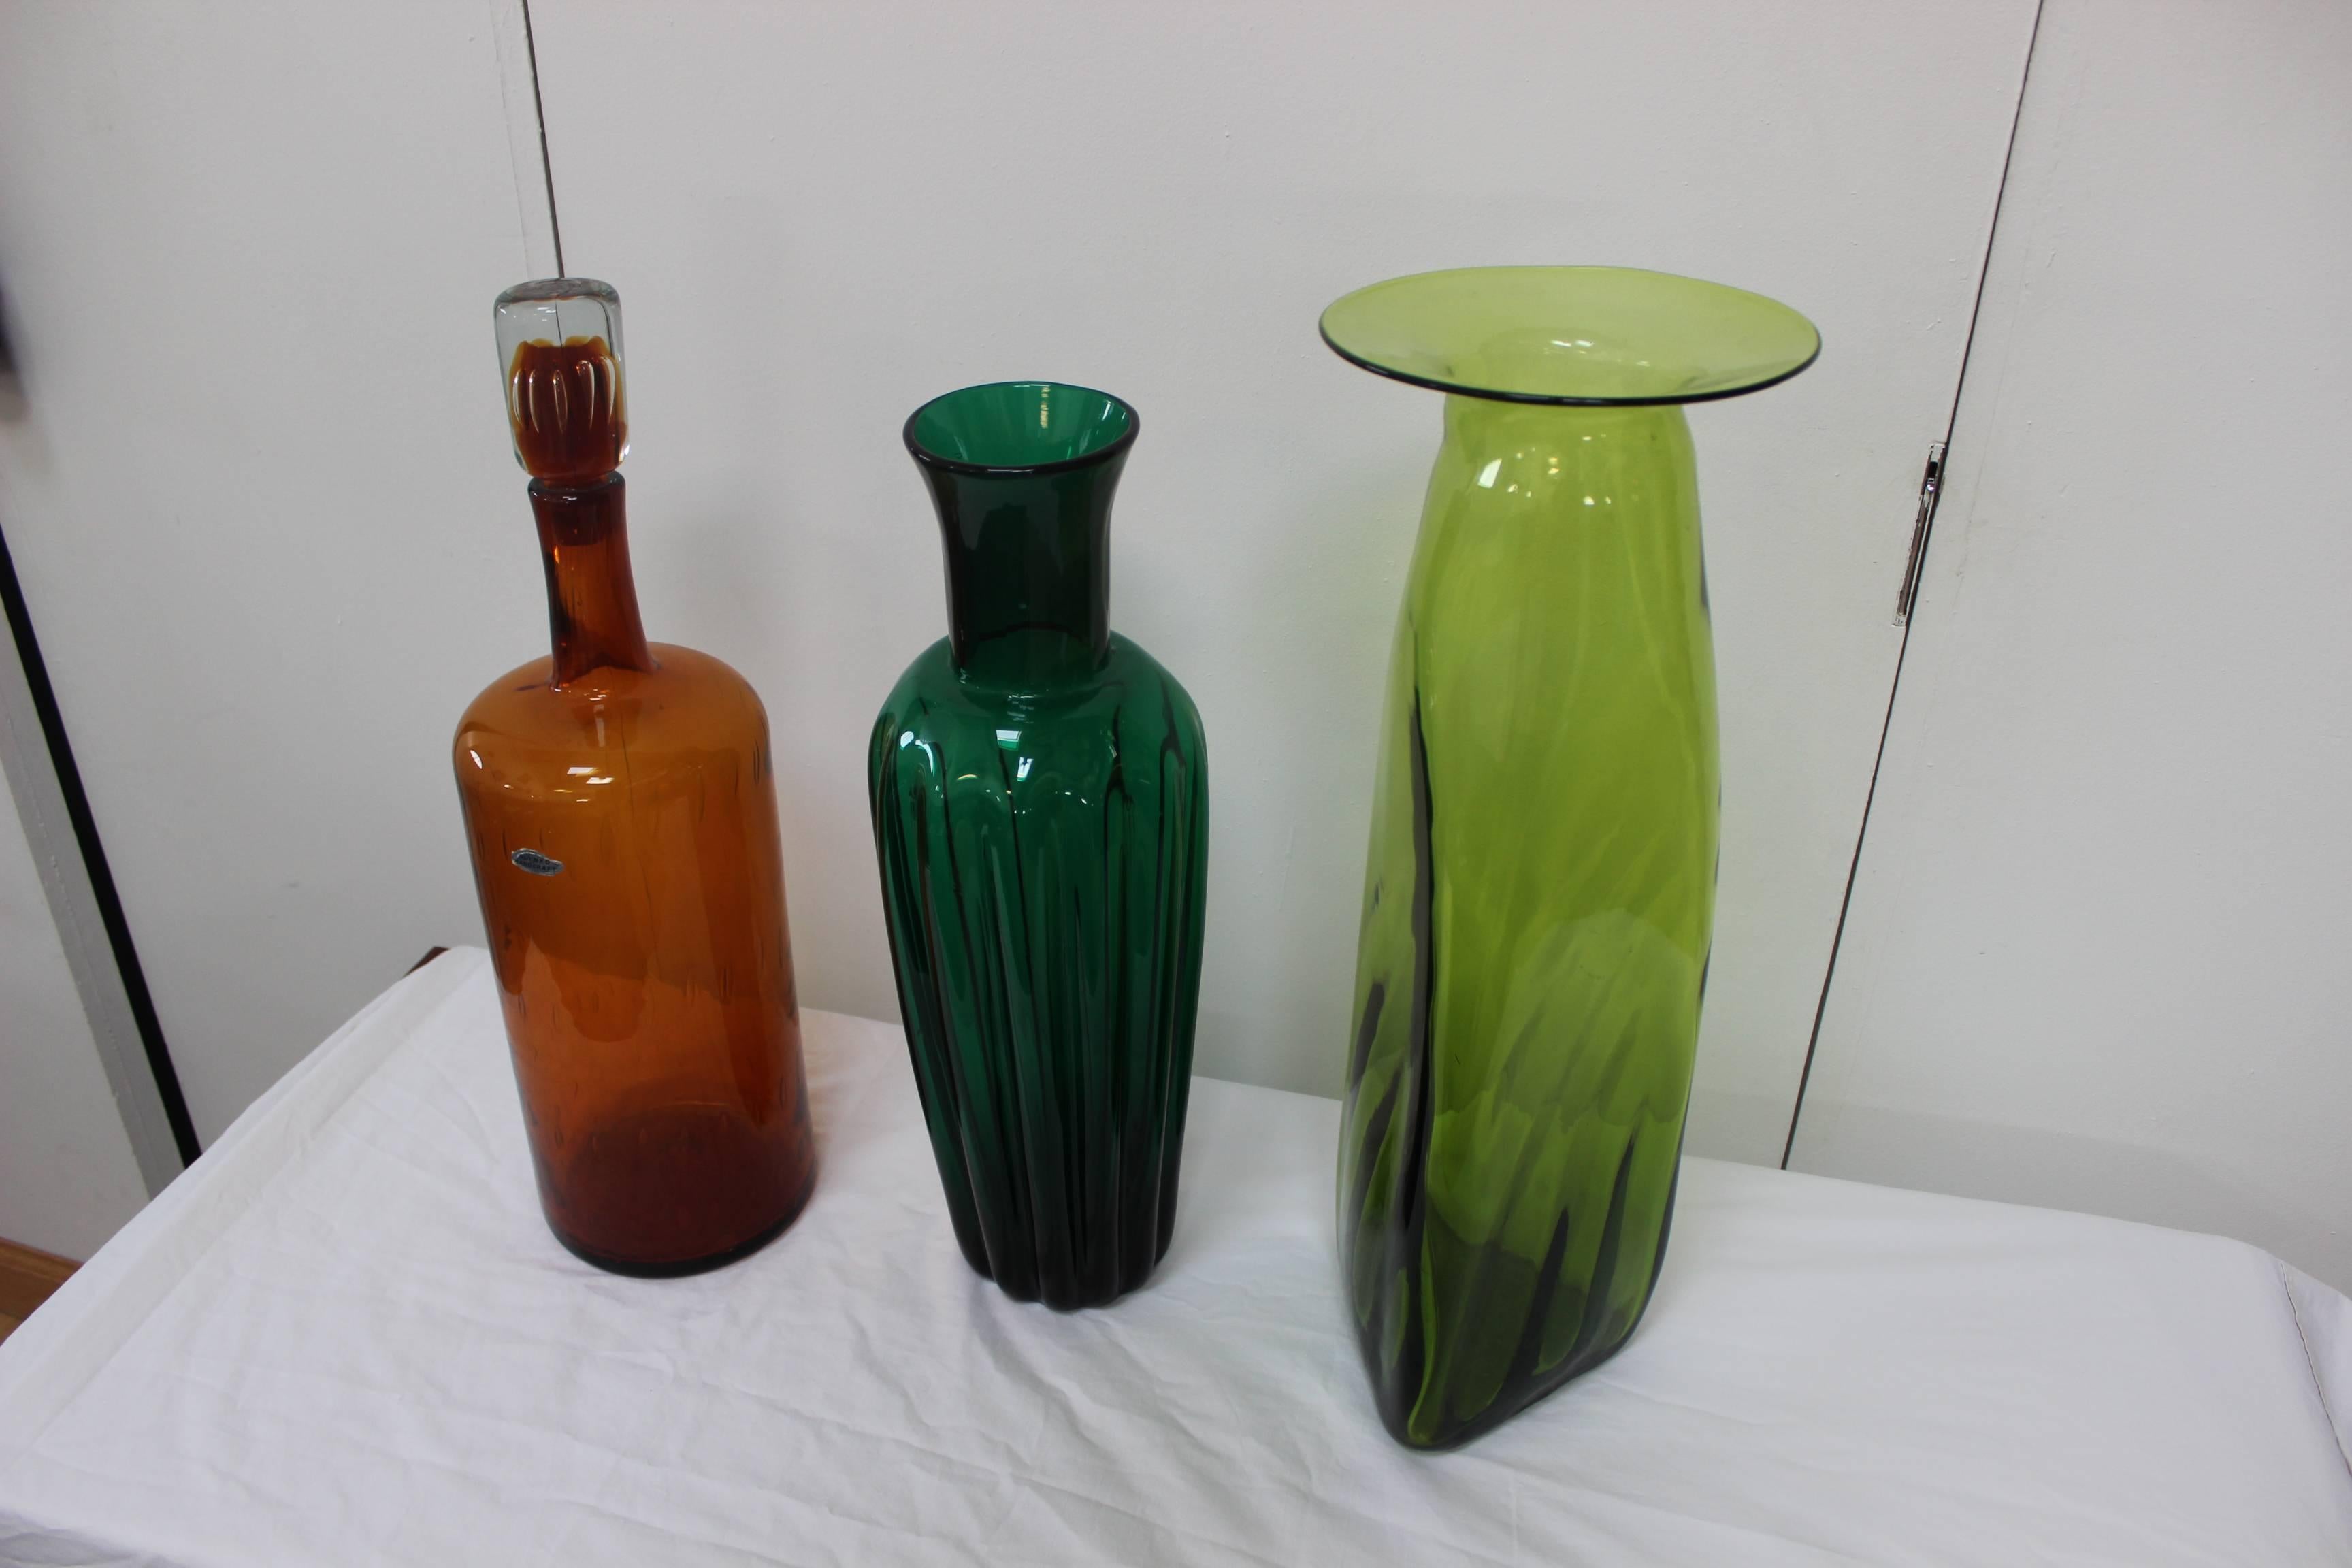 A nice set of three pieces of Blenko glass collection, the set includes two large vases and a bottle with stopper.
 
The measurements are:
Brown bottle height 21.5 diameter 6.5''.
Green vase height 22.25'' diameter 8'.
Dark green vase height